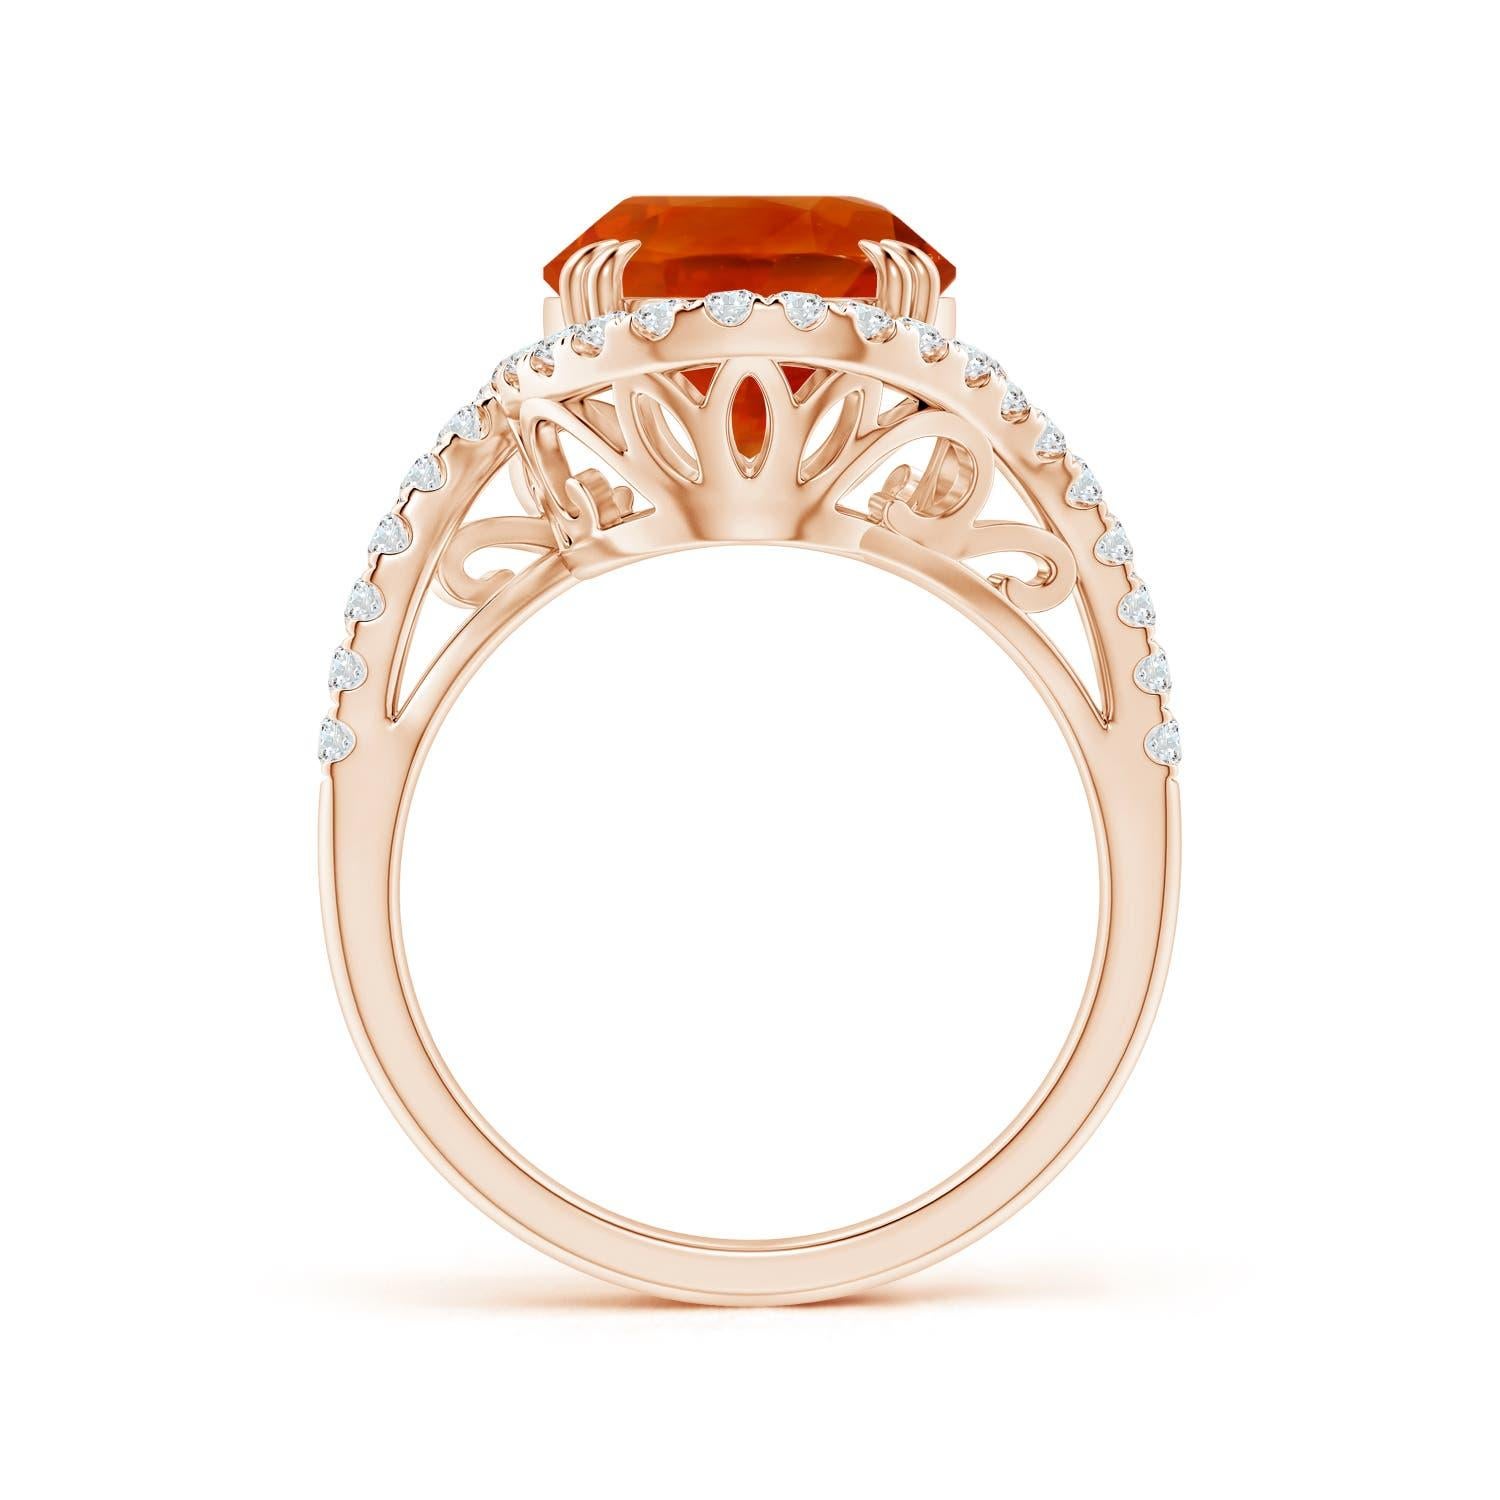 For Sale:  Angara Gia Certified Natural Orange Sapphire Ring in Rose Gold with Diamonds 2